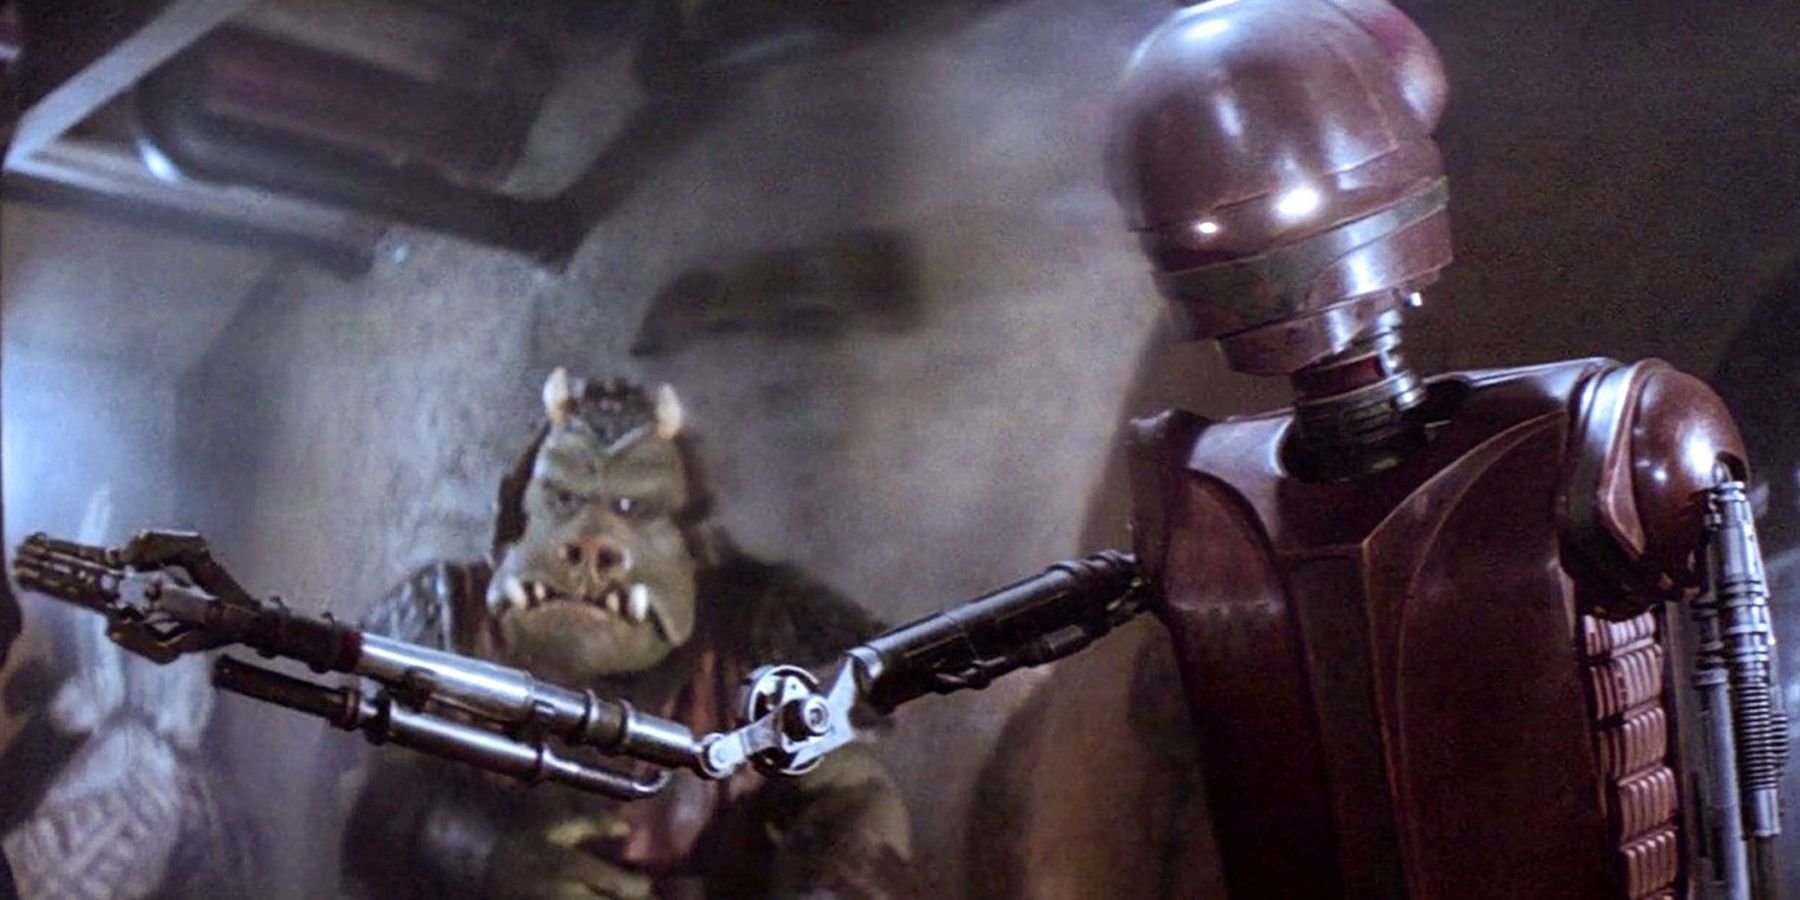 EV-9D9 the torture droid in Jabba's Palace in Return of the Jedi